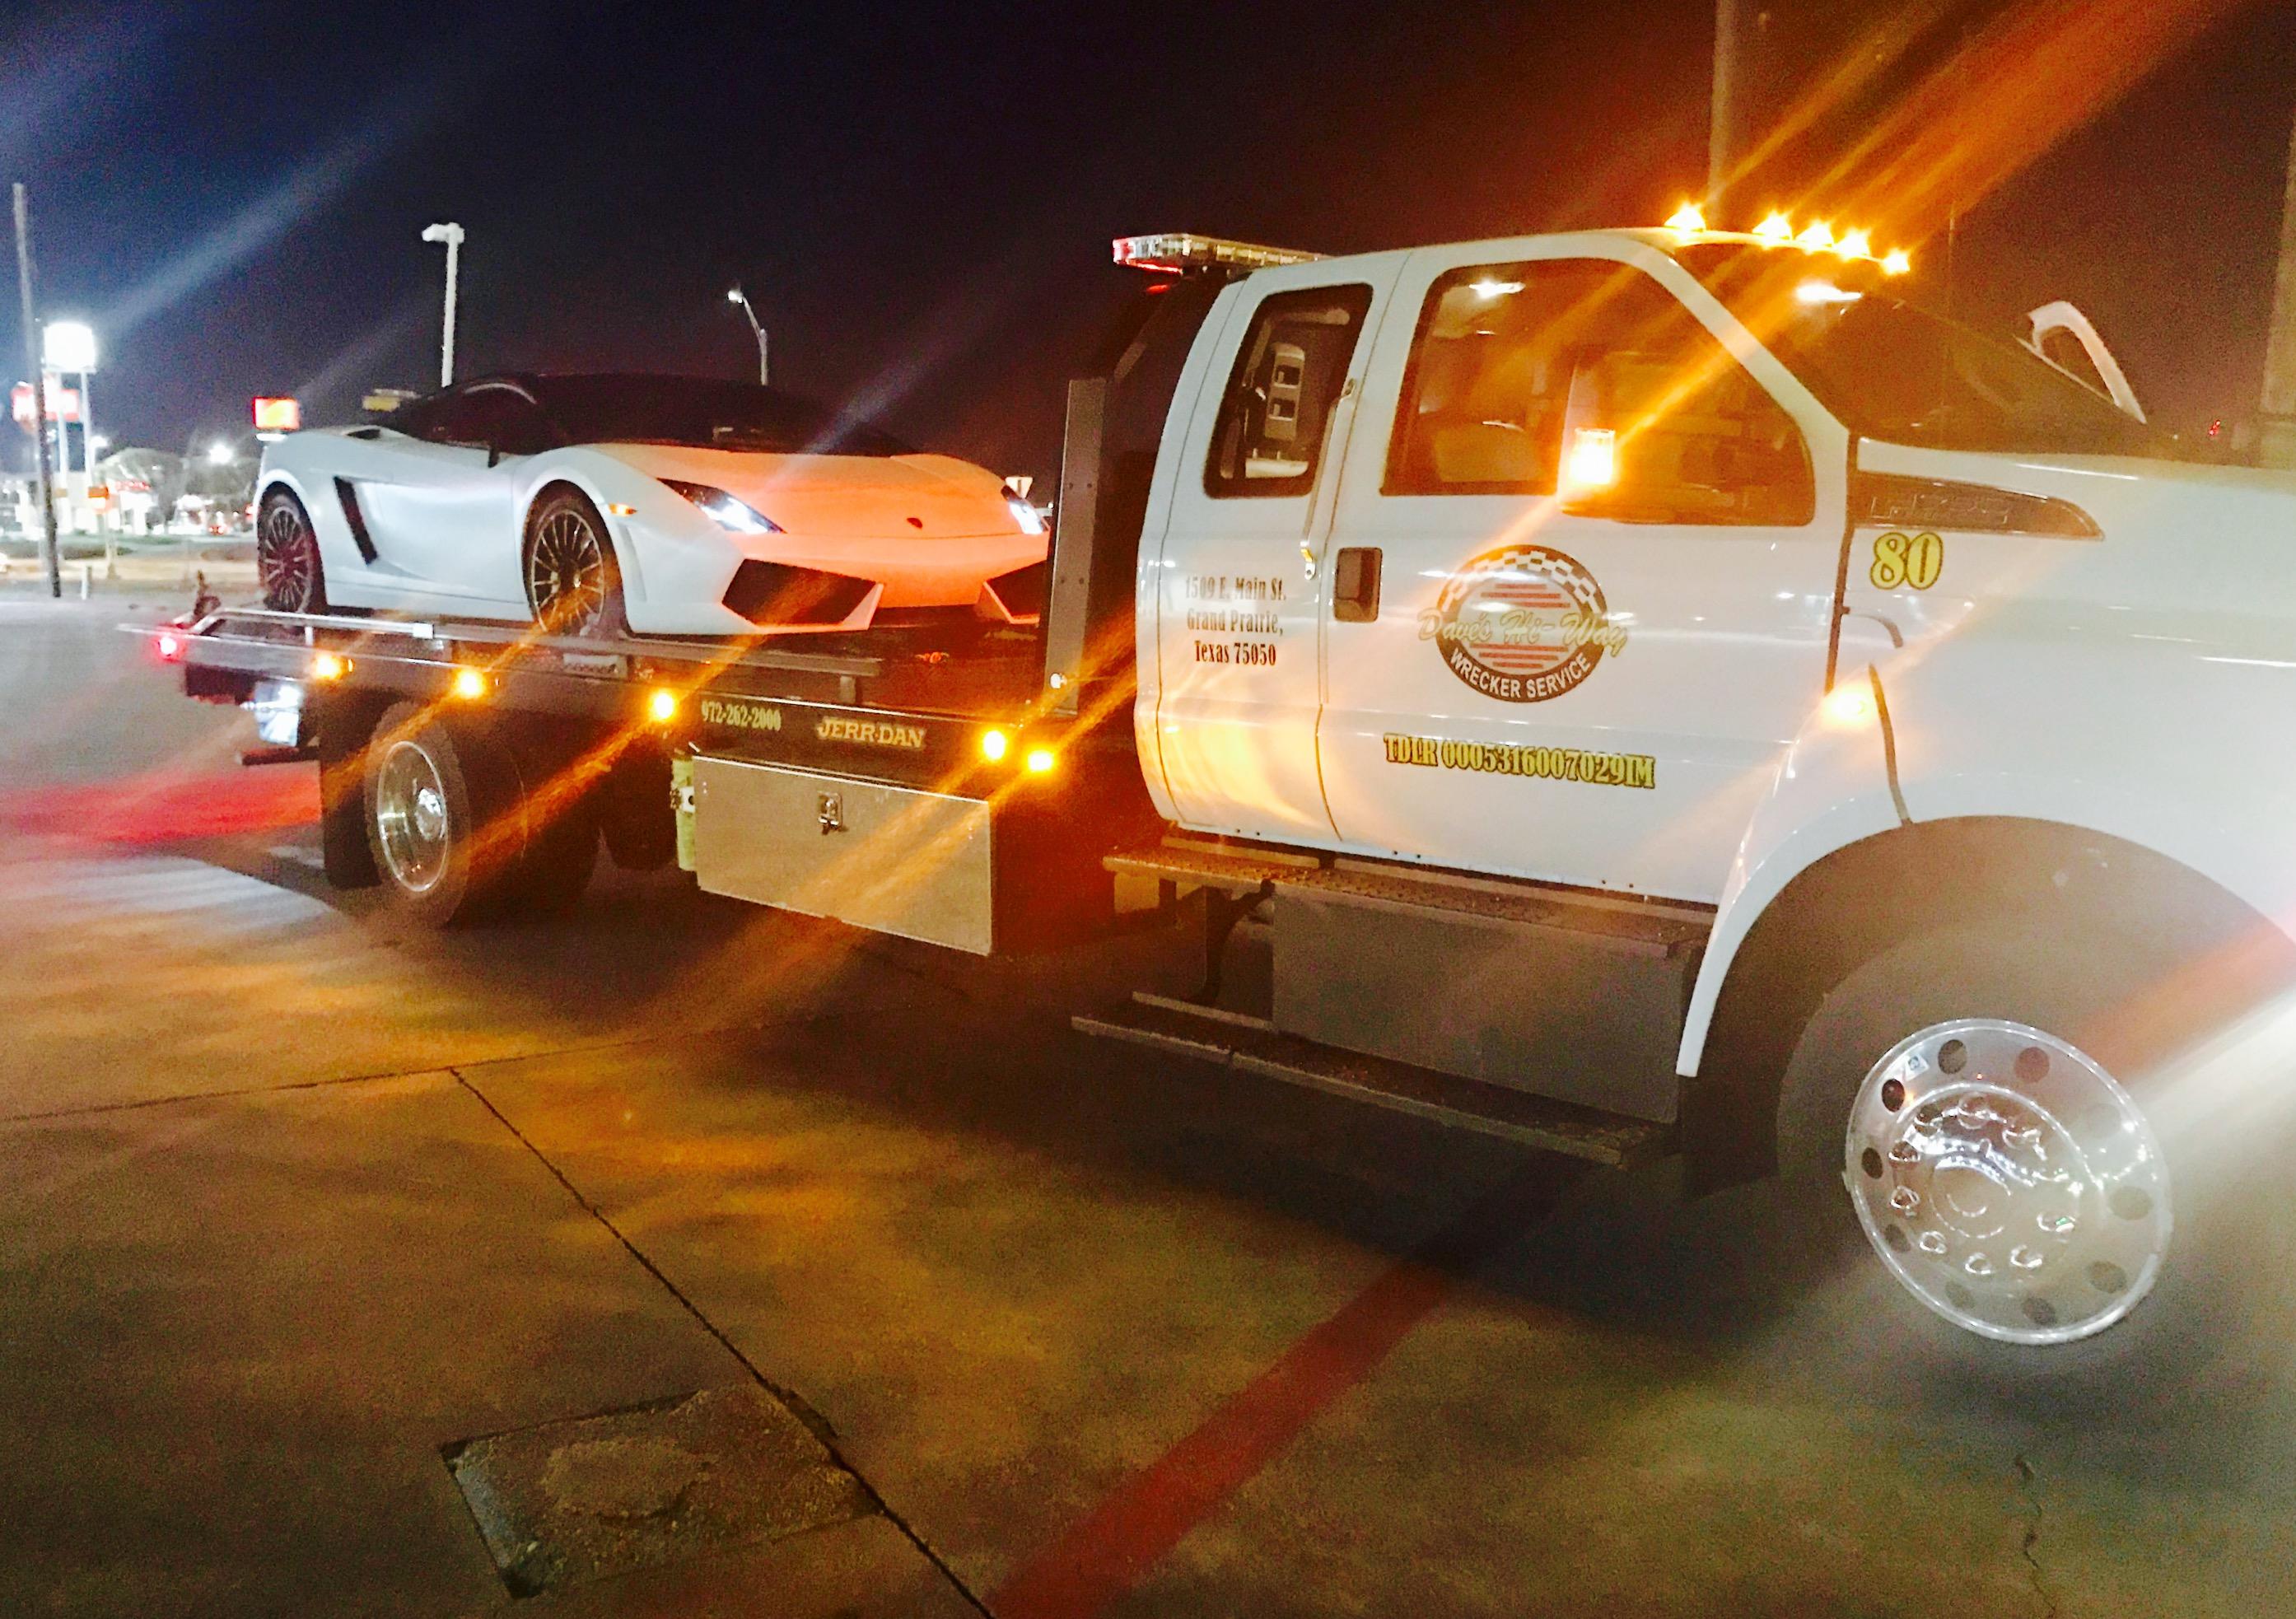 Don't get stuck without a tow truck! Call now!